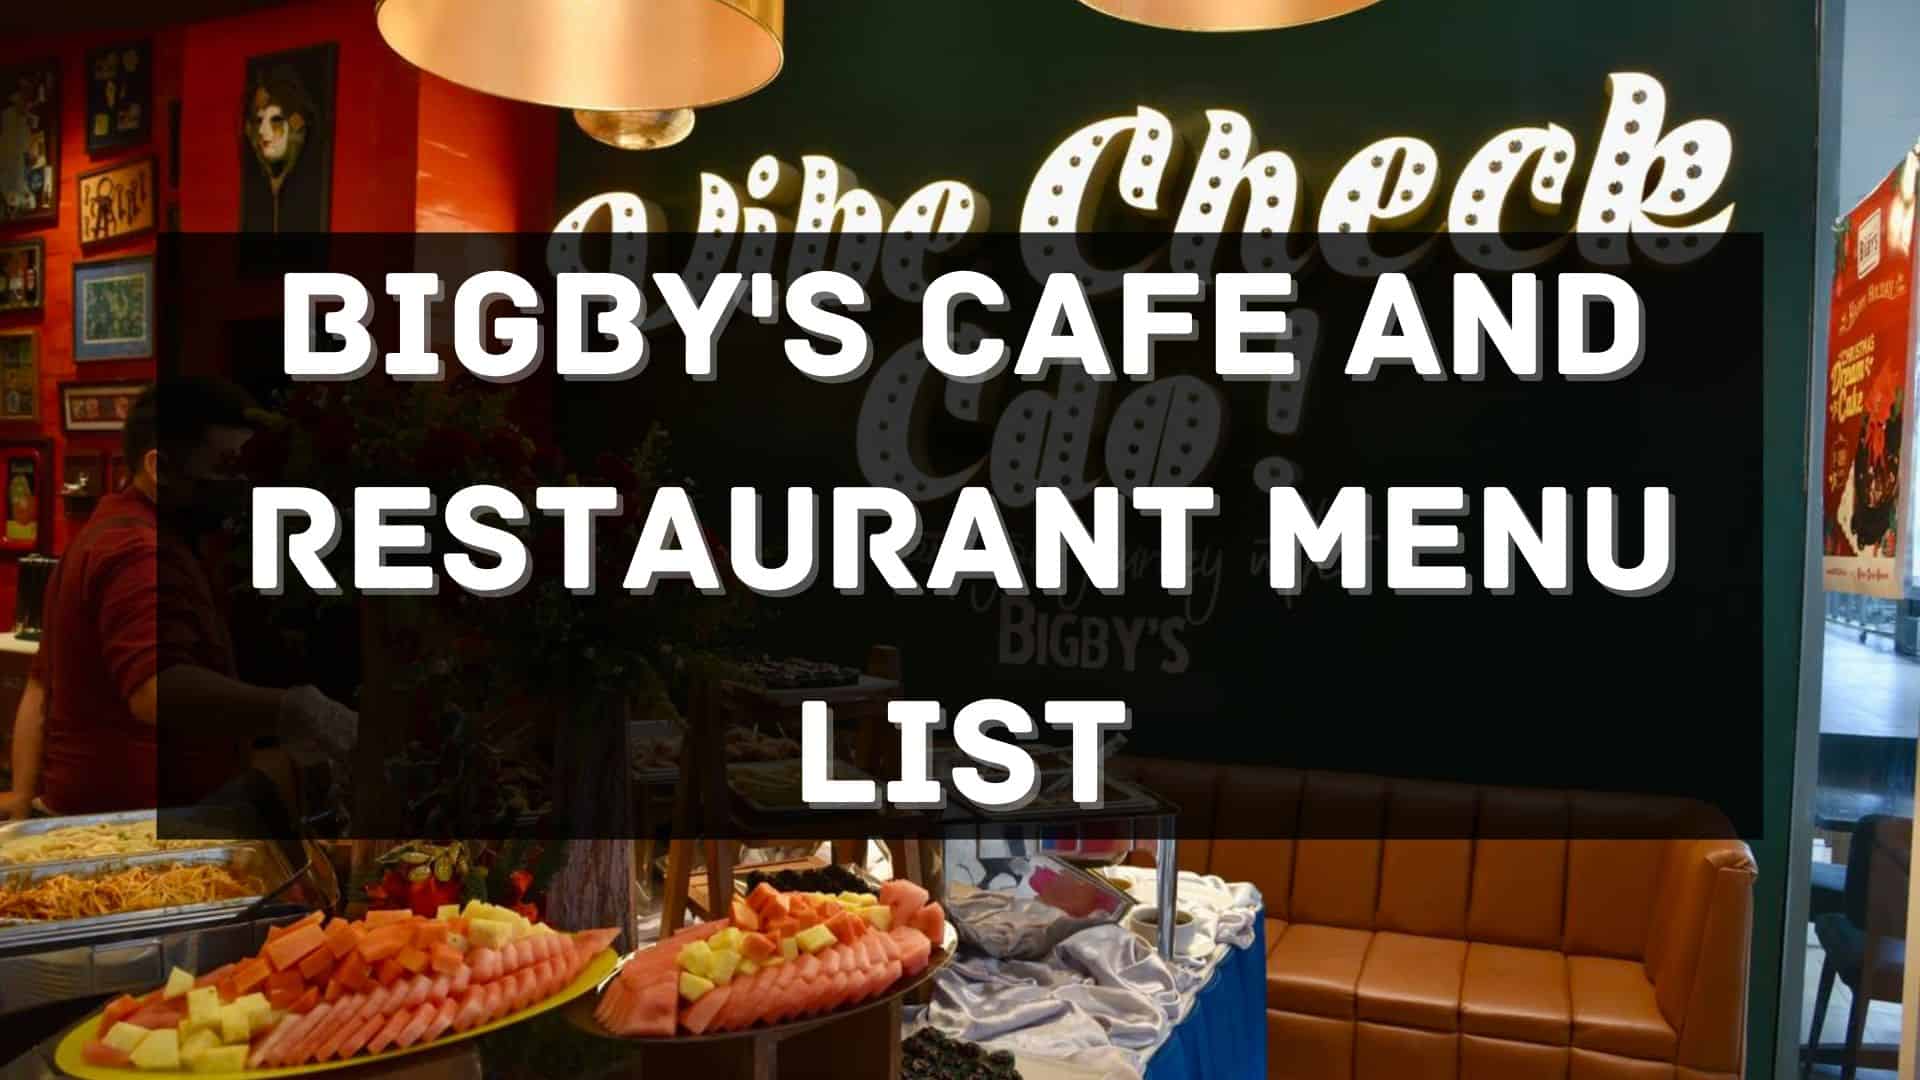 bibgy's cafe and restaurant menu prices philippines